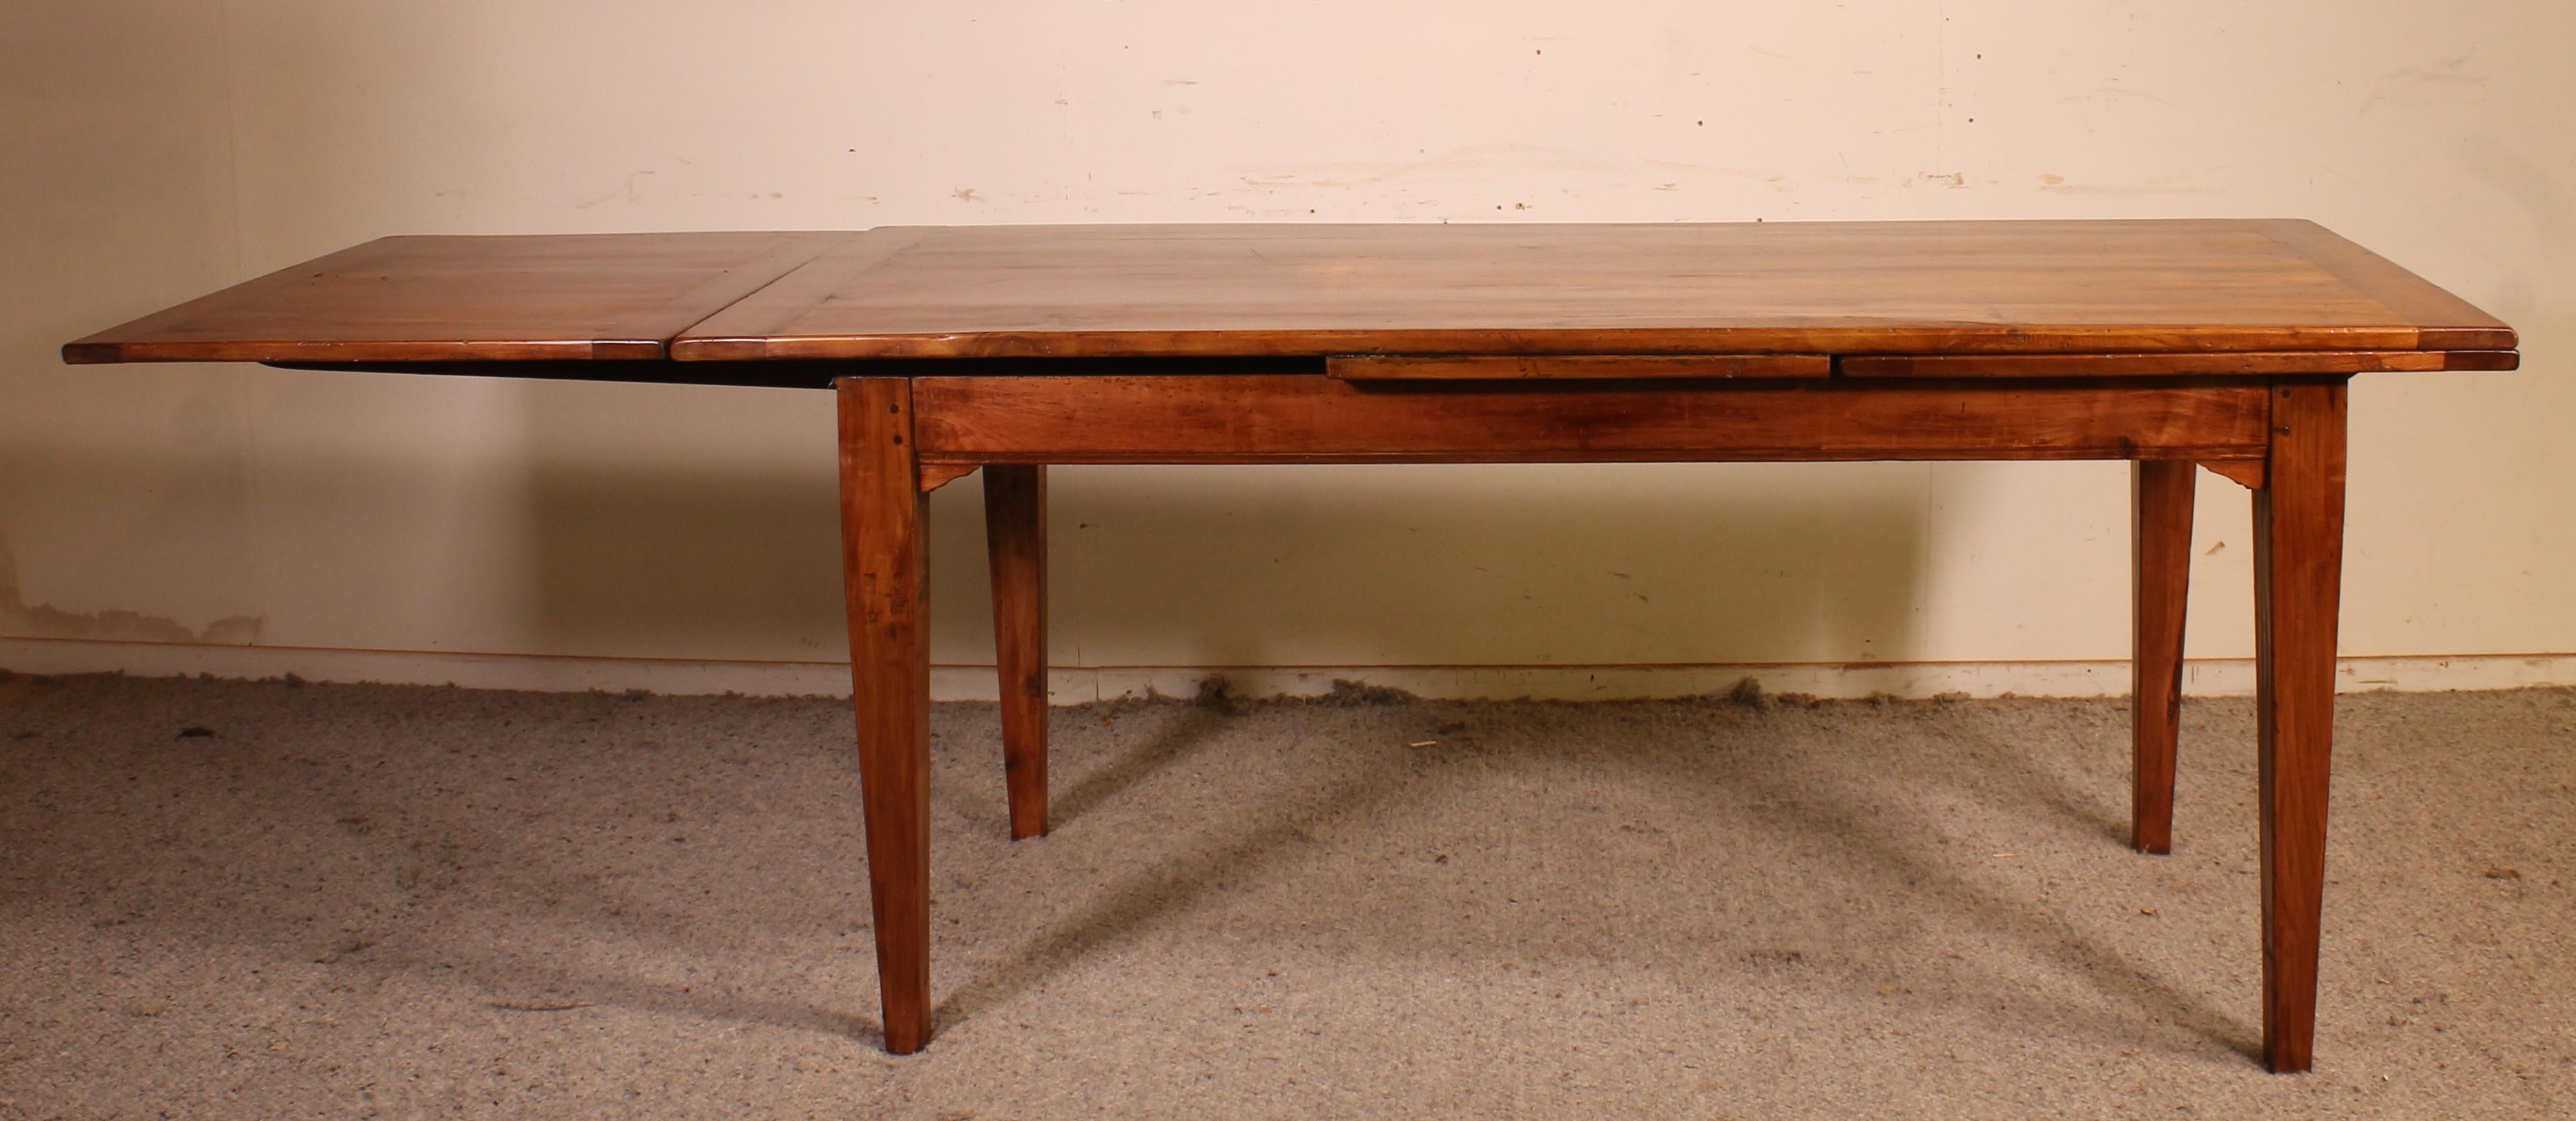 French Small Extendable Table in Cherry Wood from the 19th Century For Sale